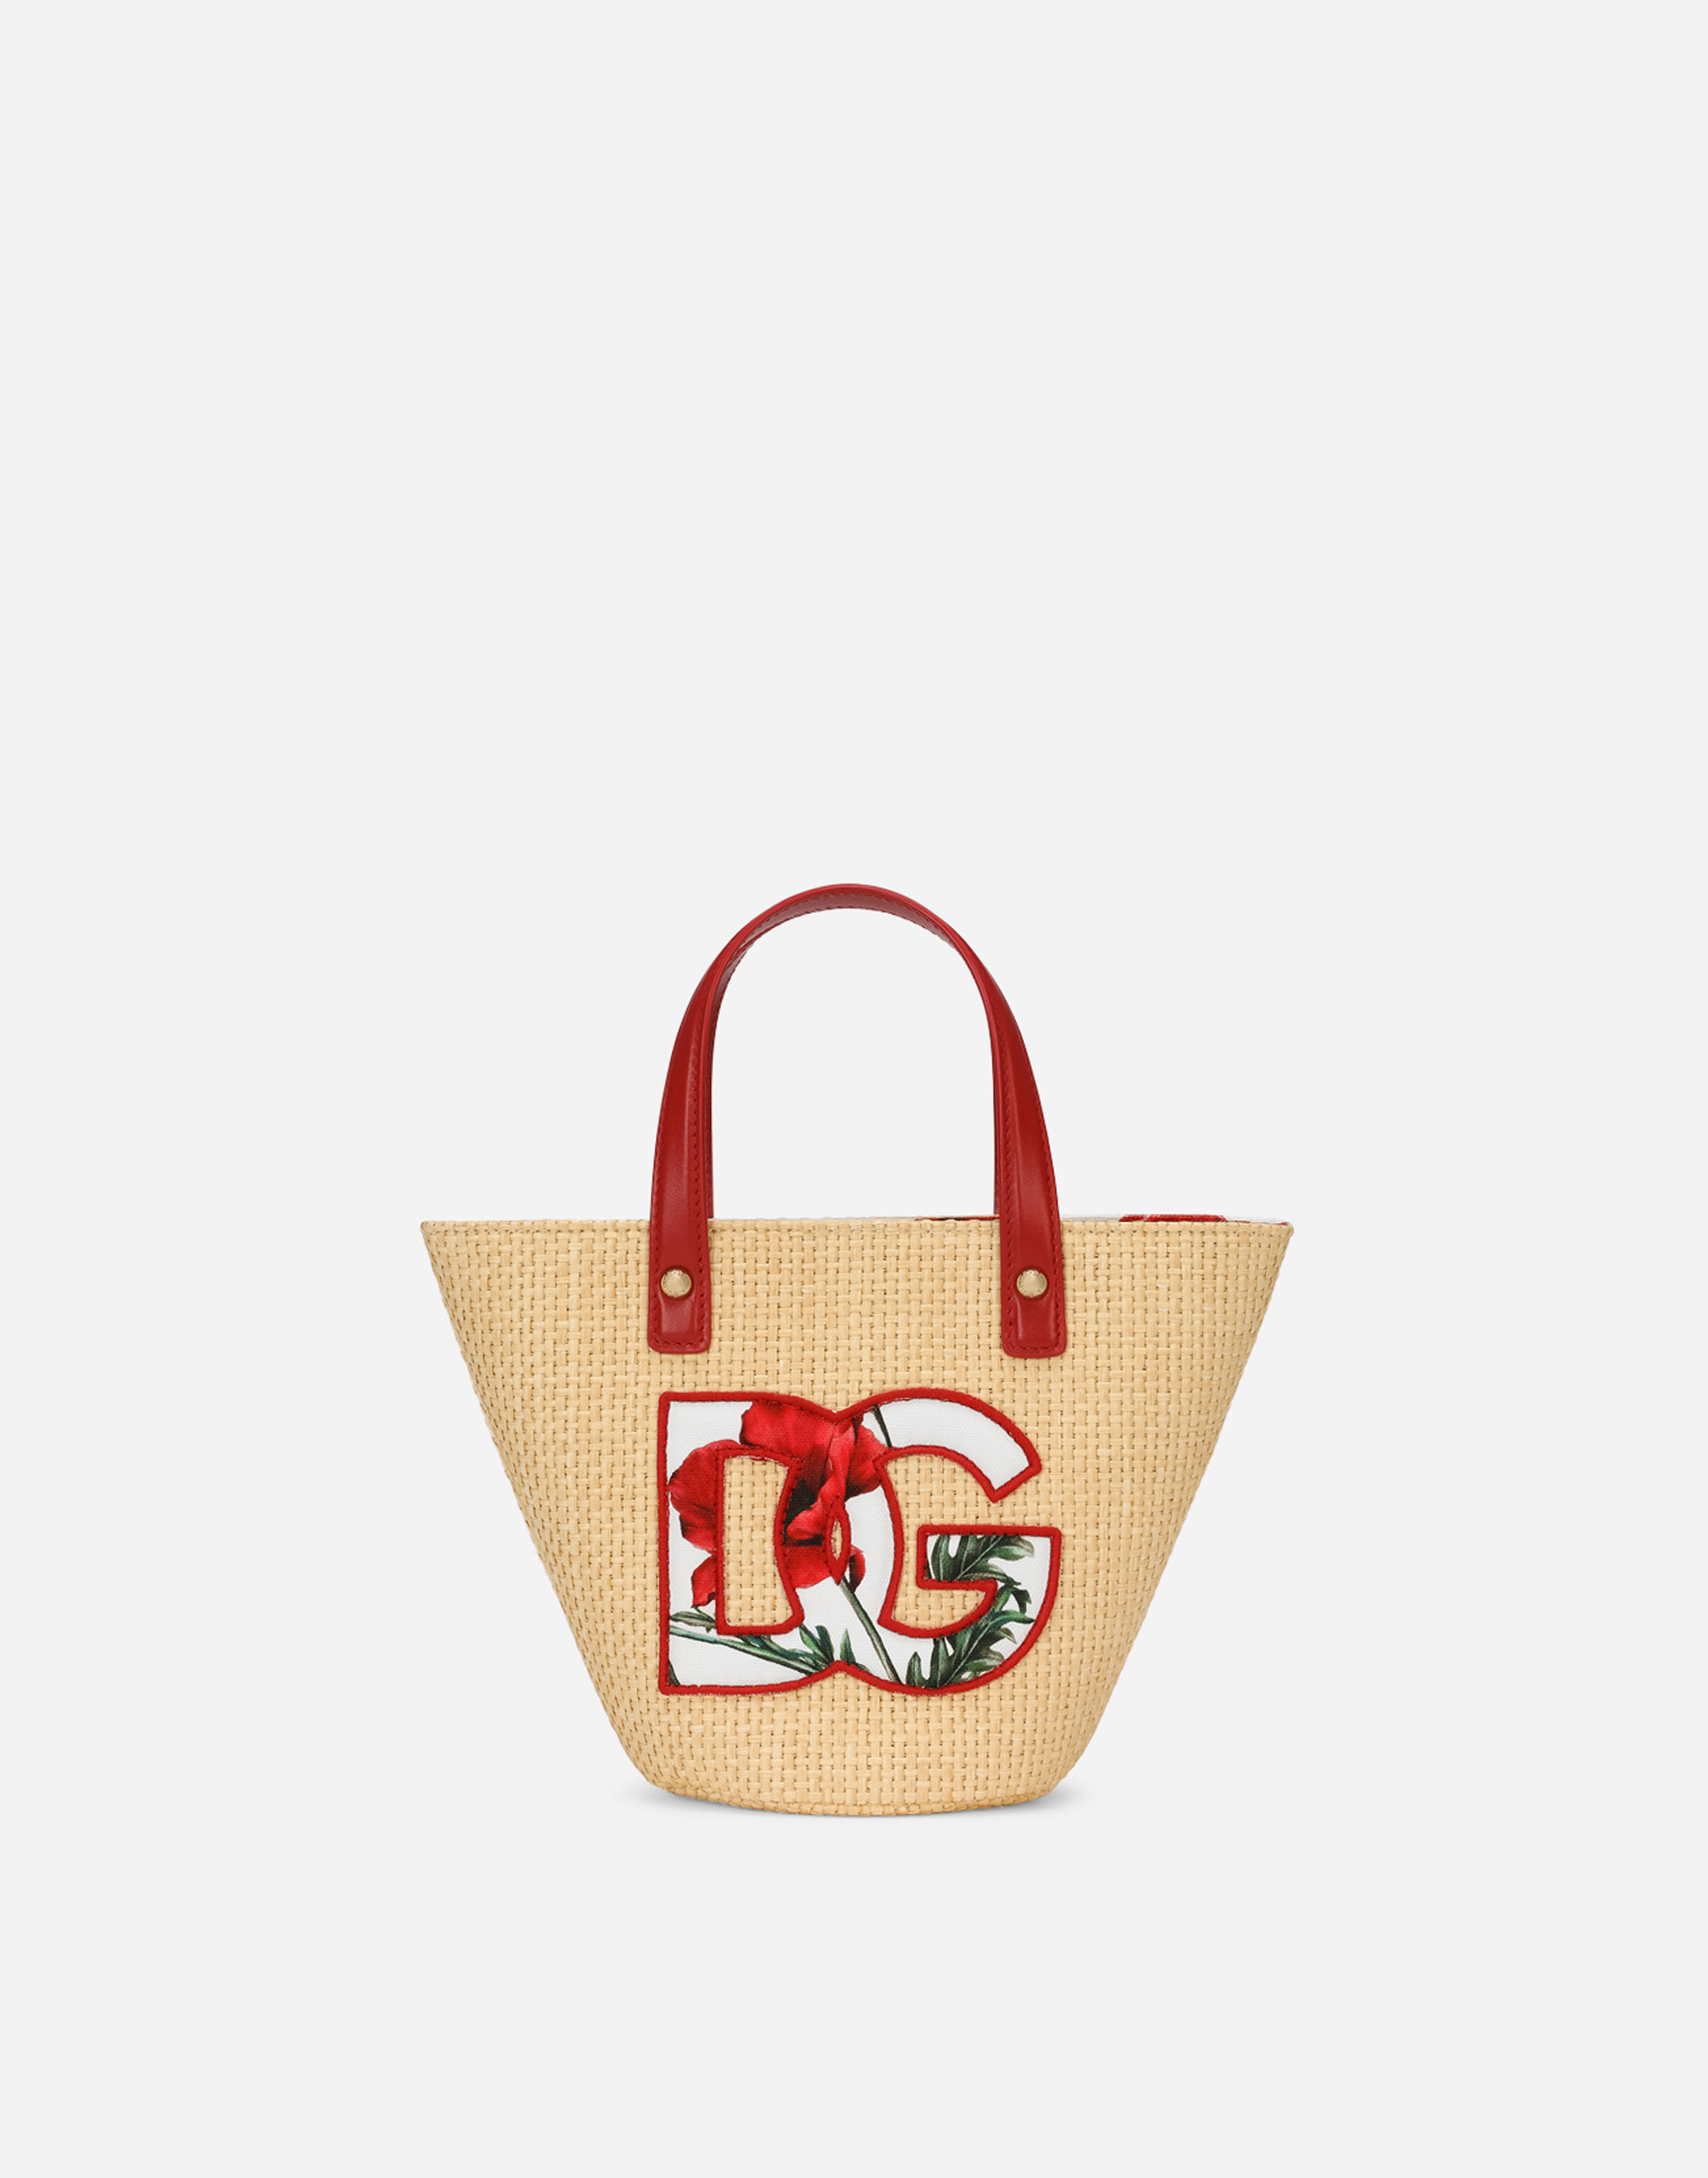 Straw handbag with patch and maxi-DG logo in Multicolor